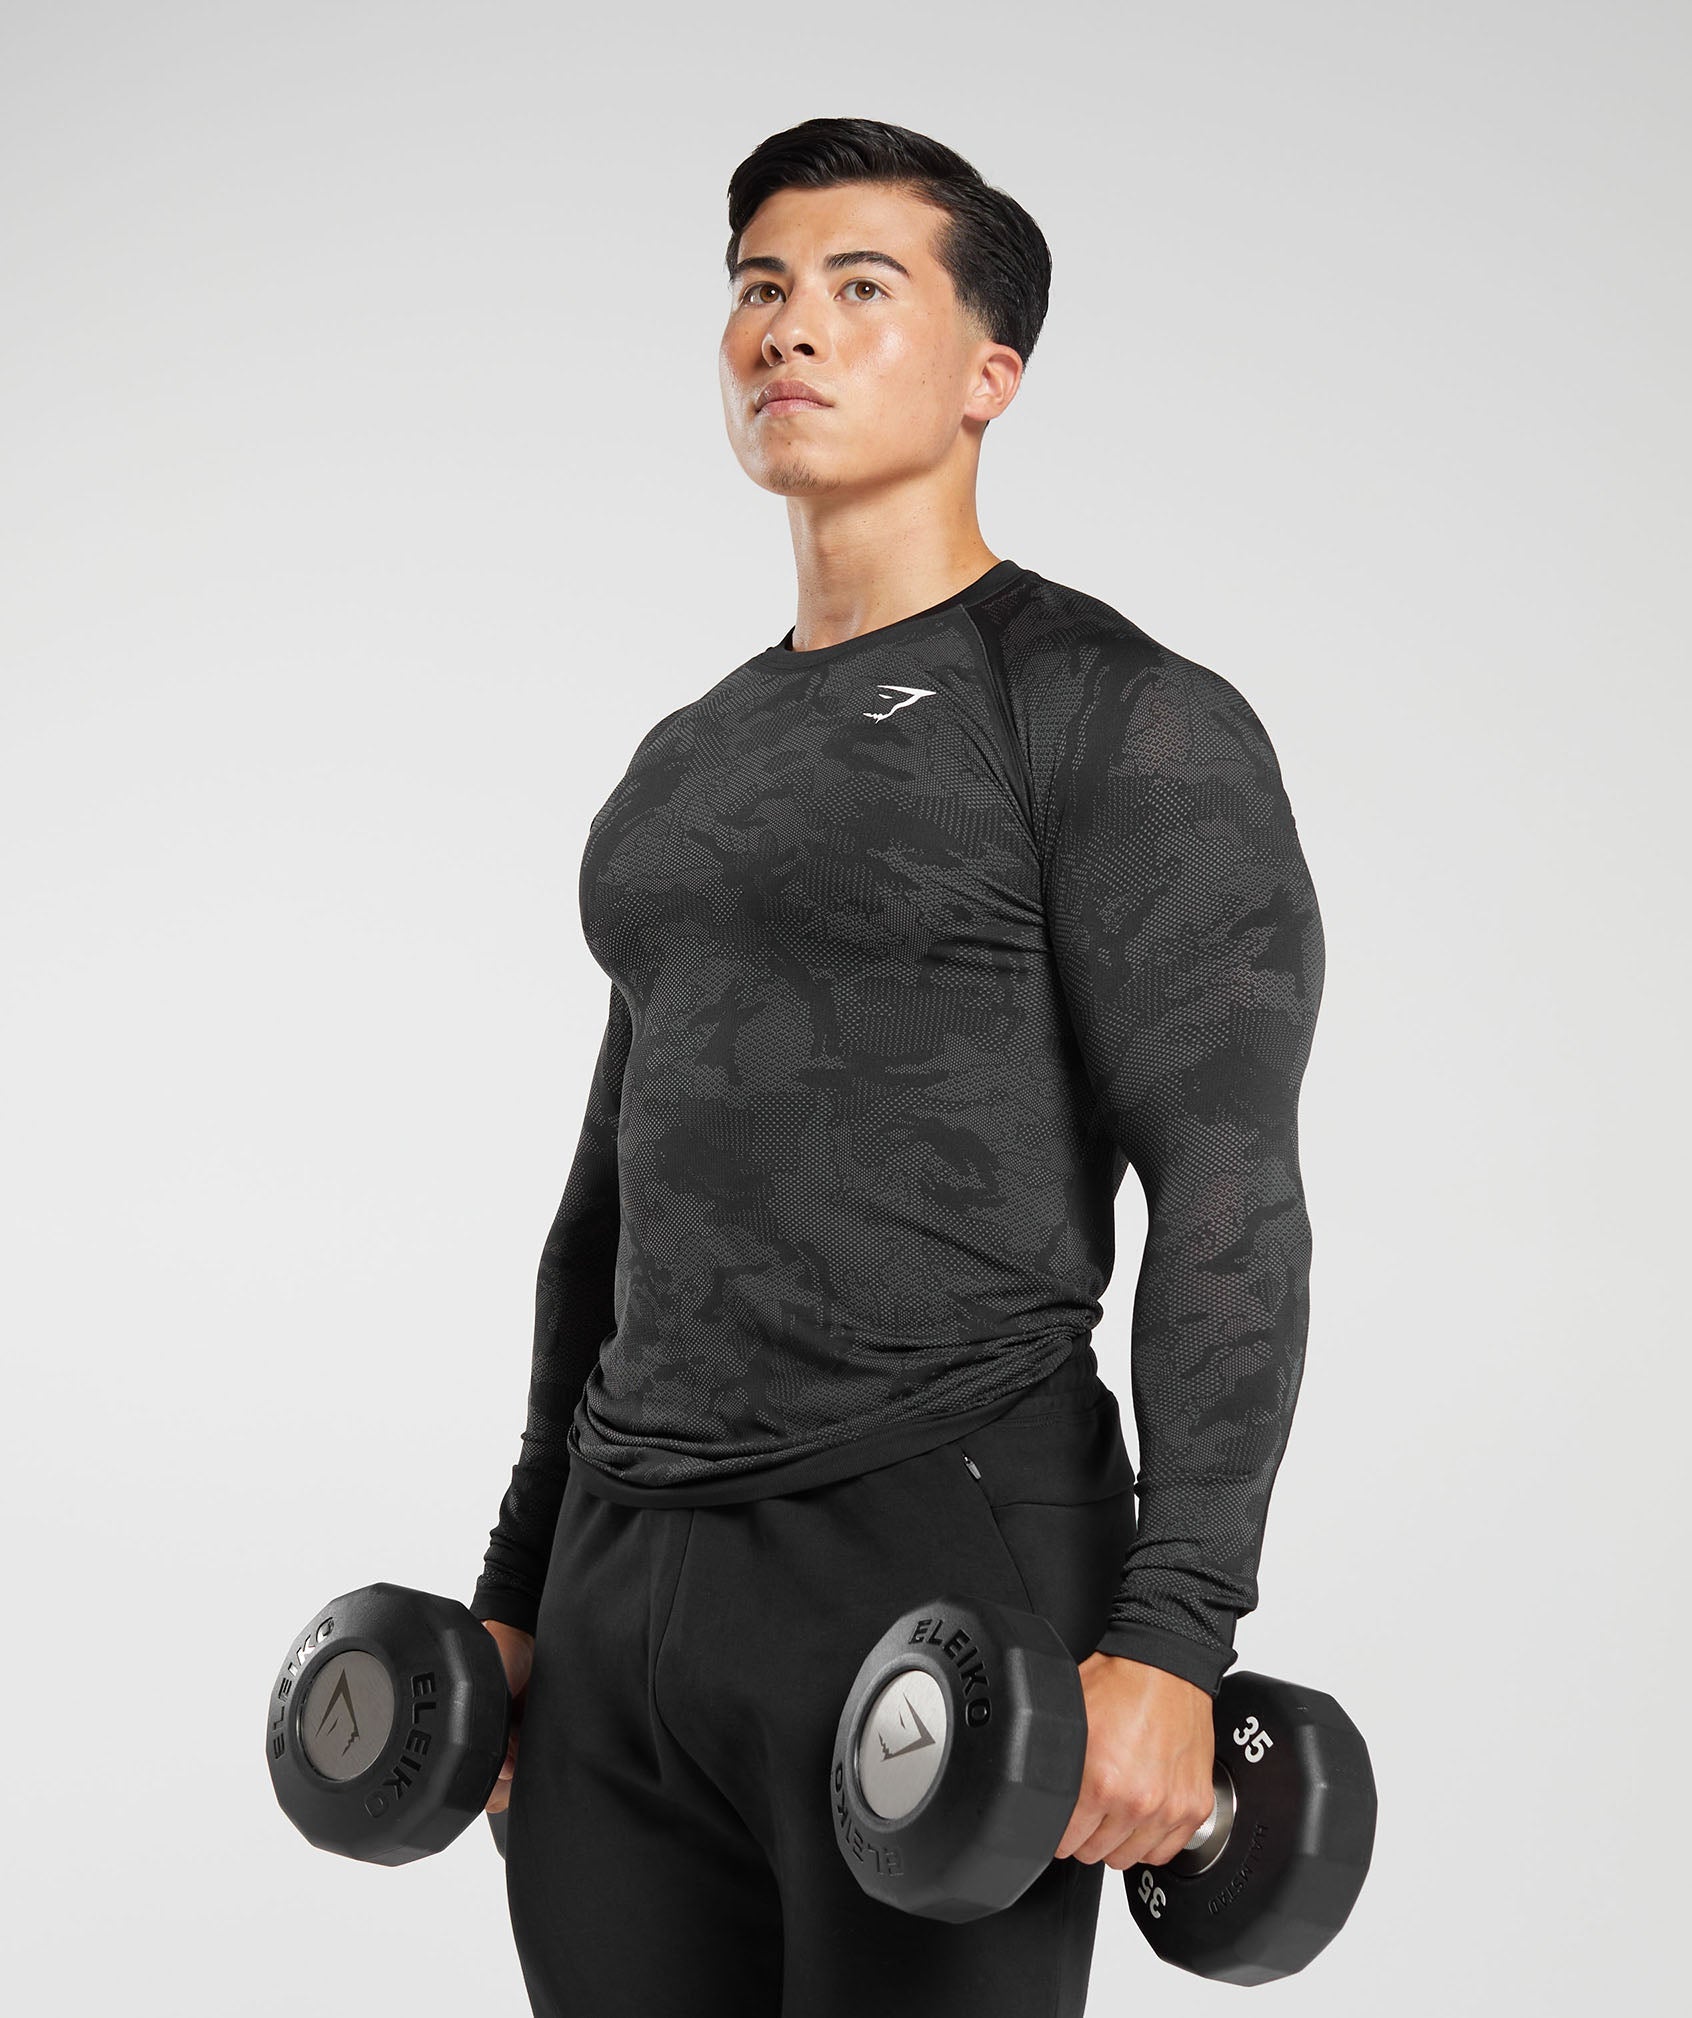 Geo Seamless Long Sleeve T-Shirt in Black/Charcoal Grey - view 3